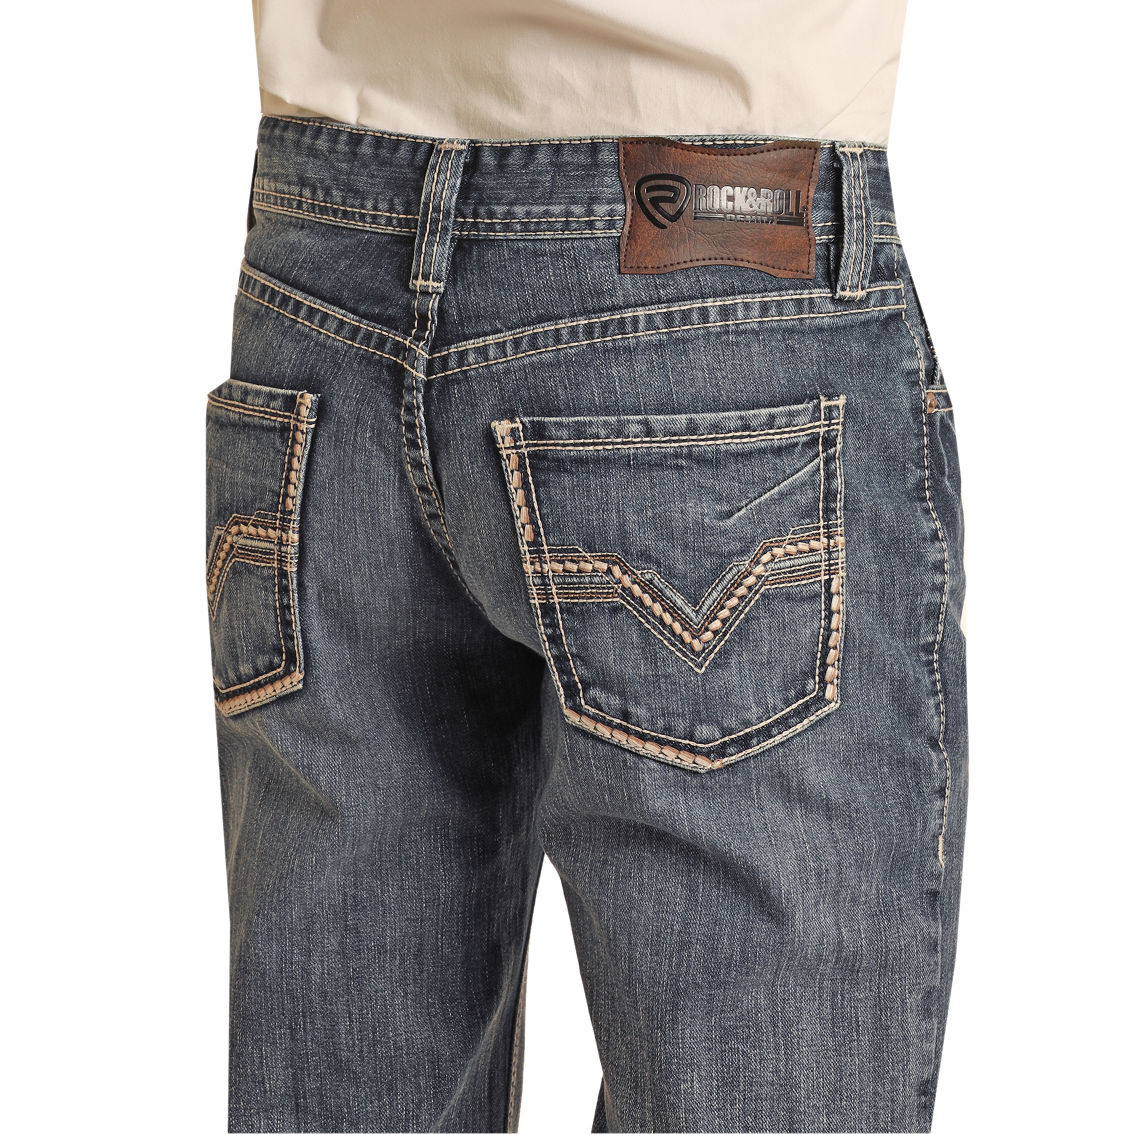 Rock & Roll Denim Double Barrel Relaxed Fit Straight Leg Jeans - Image 3 of 3